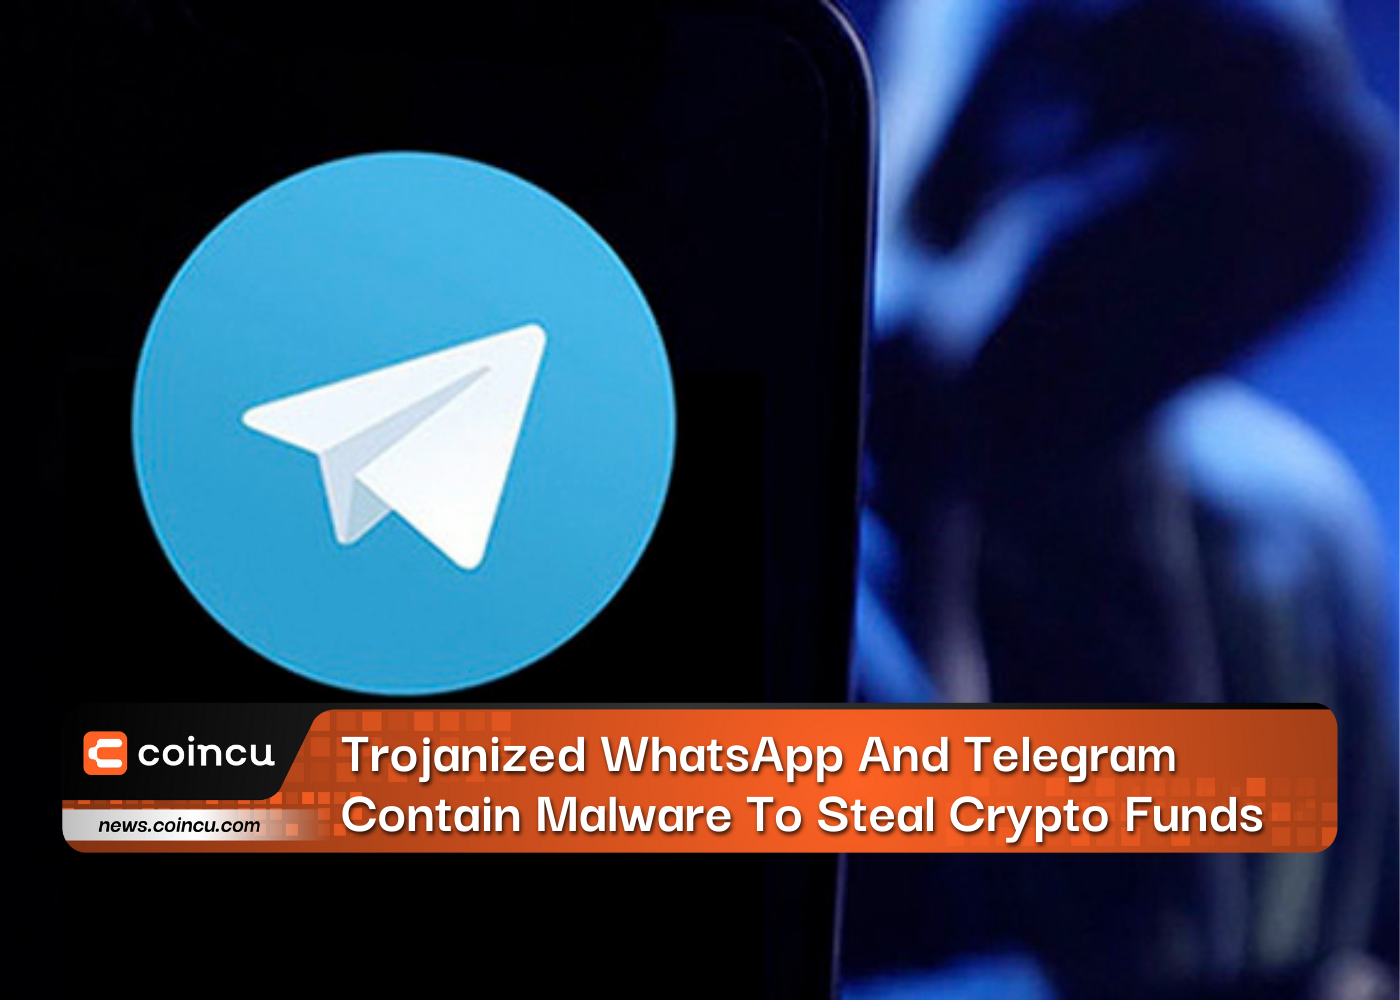 Trojanized WhatsApp And Telegram Contain Malware To Steal Crypto Funds